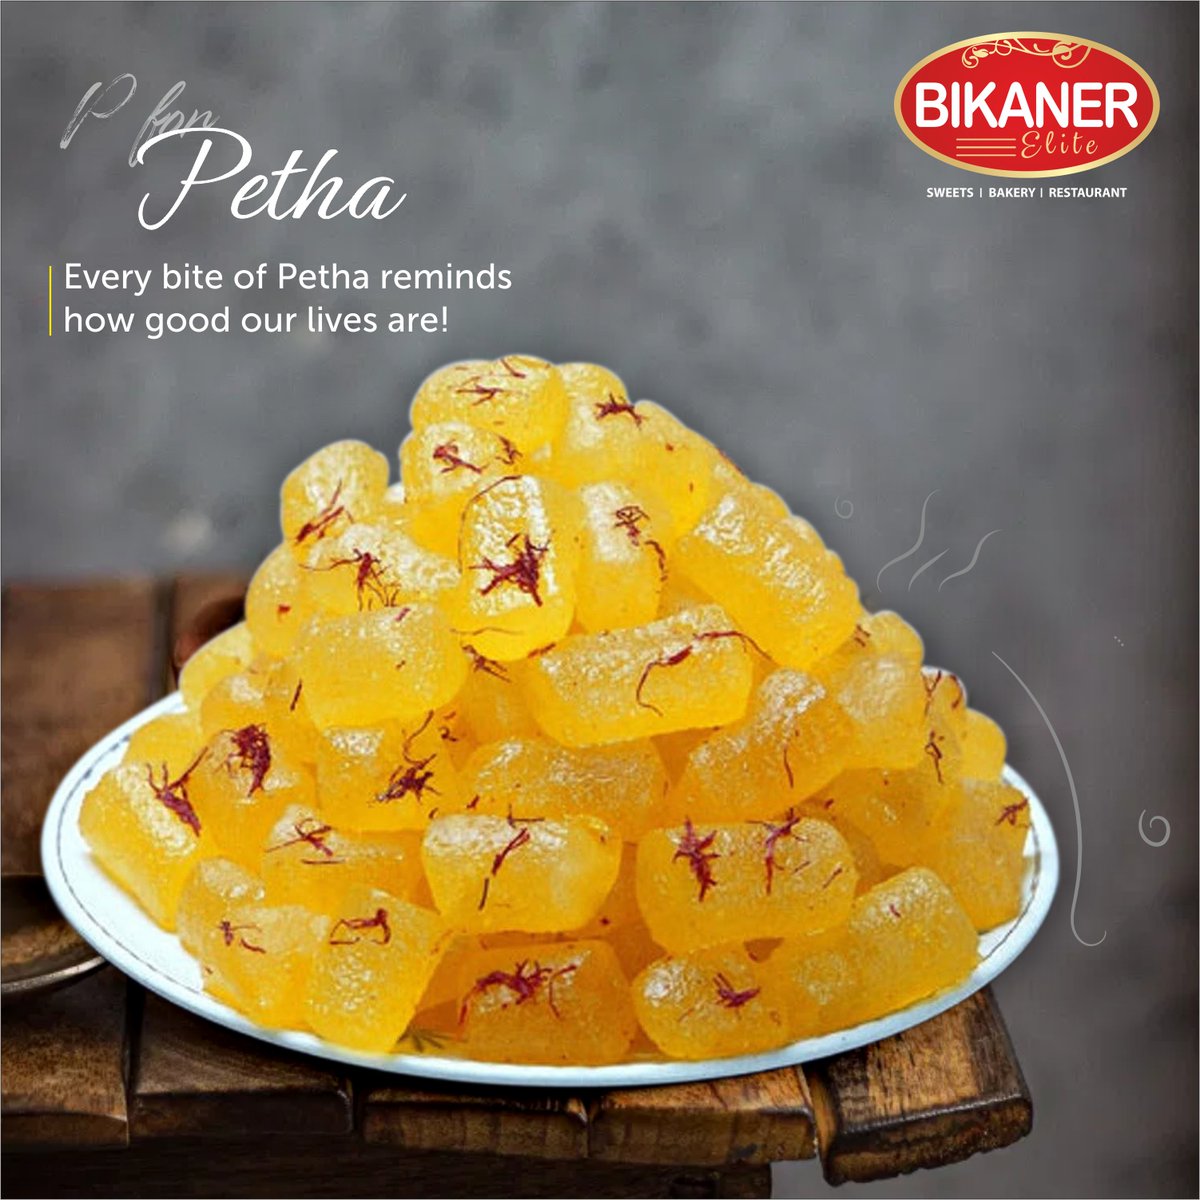 An Indian sweet-dish that you can never settle with just one piece – Petha is loved by one and all!
When its distinct taste takes over, doesn’t it feel like a paradise?
#Petha #SweetDelight #BikanerElite #BestPetha #FoodLove #AmazingFood #WhatATaste #IndianSweets #SweetDish